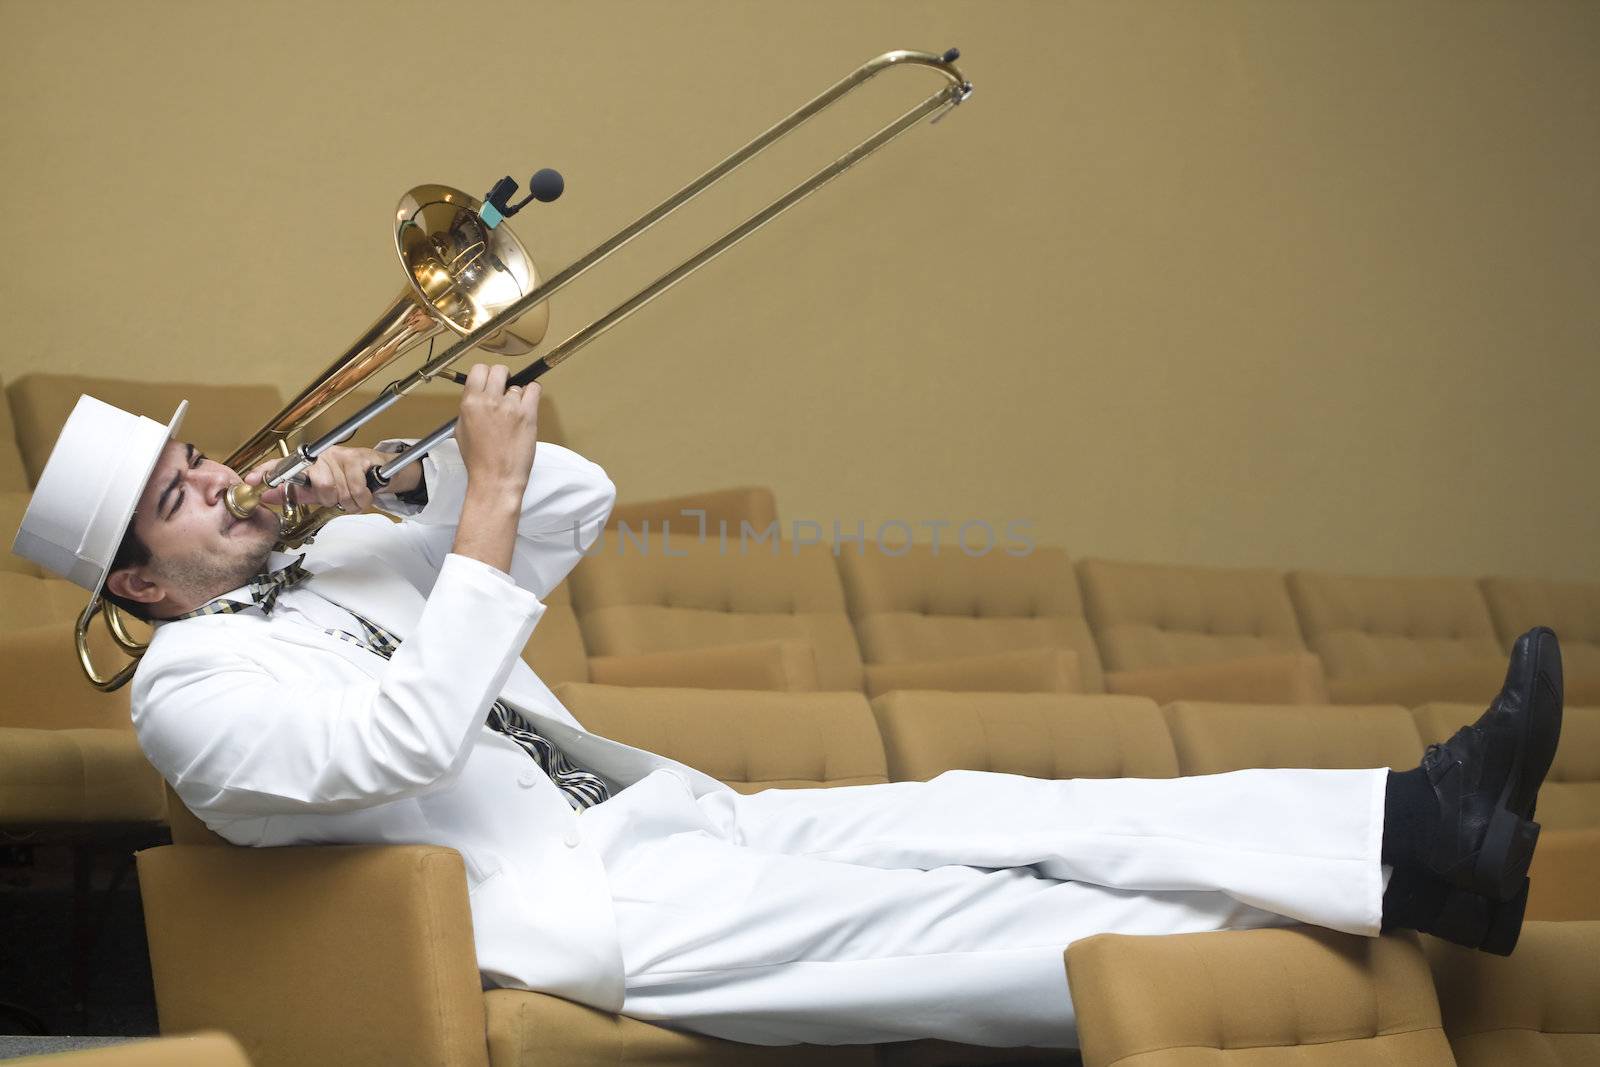 A trombonist in a white suit and yellow background.